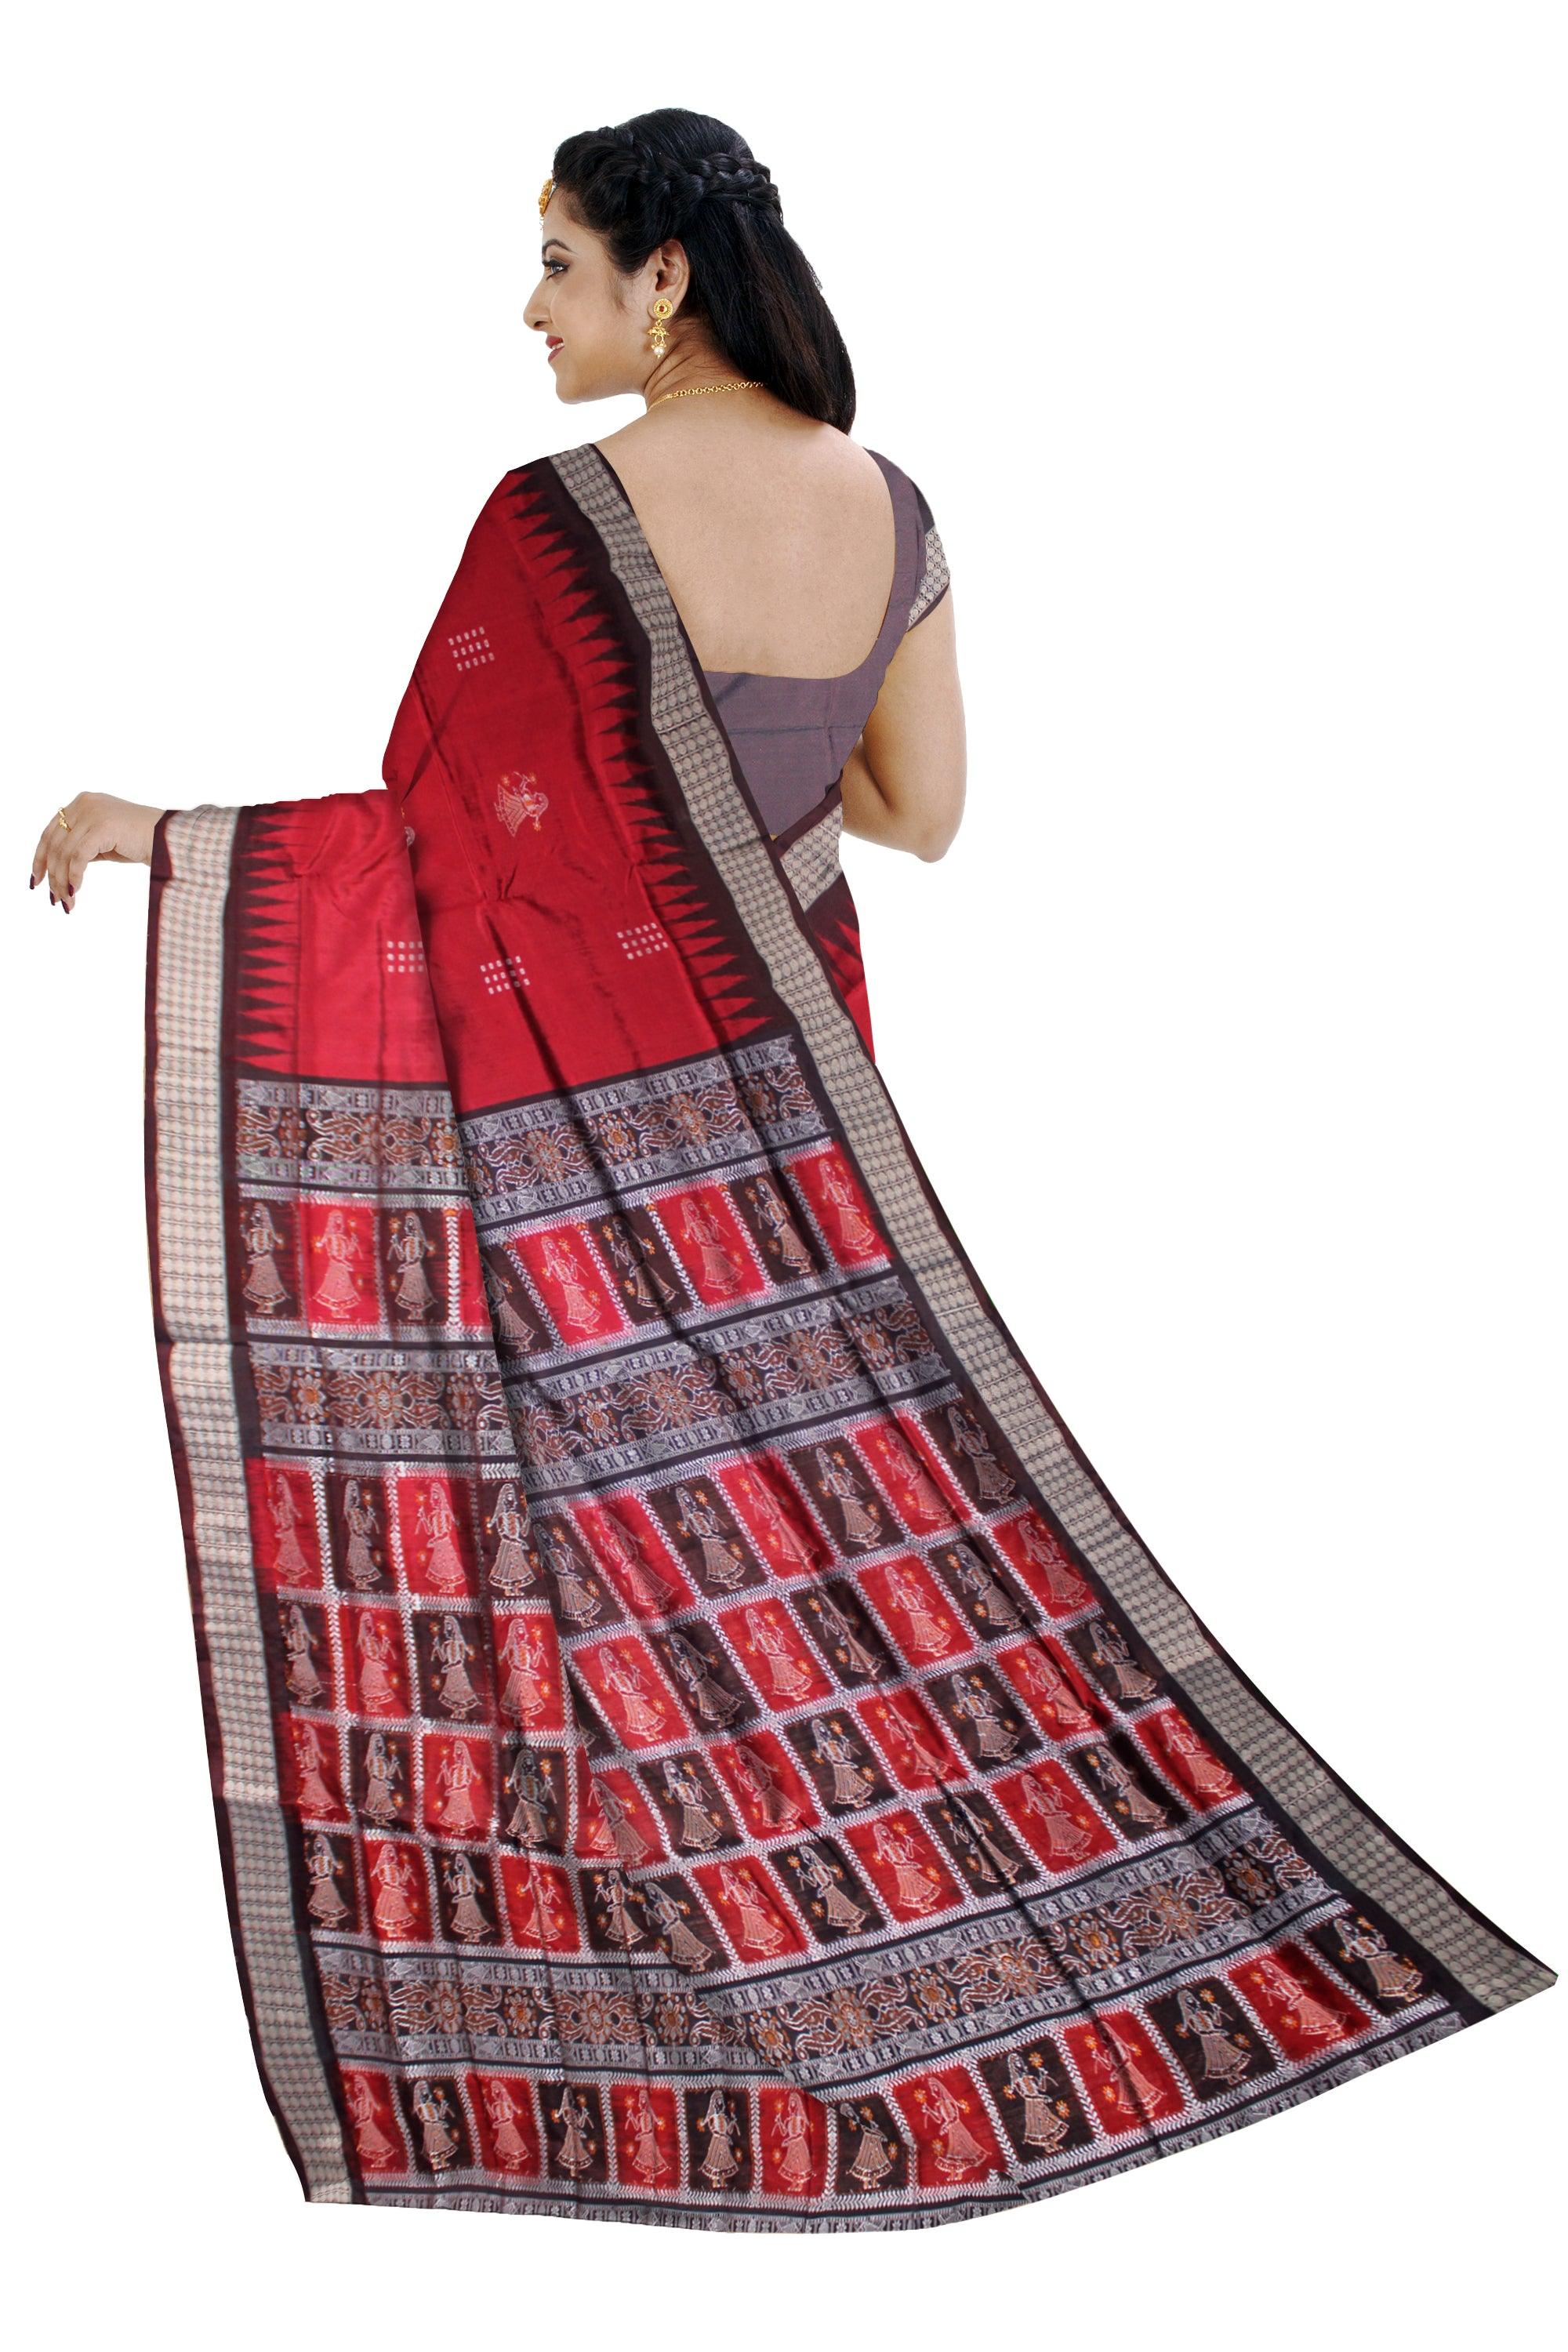 DOLL PRINT PATA SAREE IN RED AND COFFEE COLOR, AVAILABLE WITH BLOUSE PIECE. - Koshali Arts & Crafts Enterprise